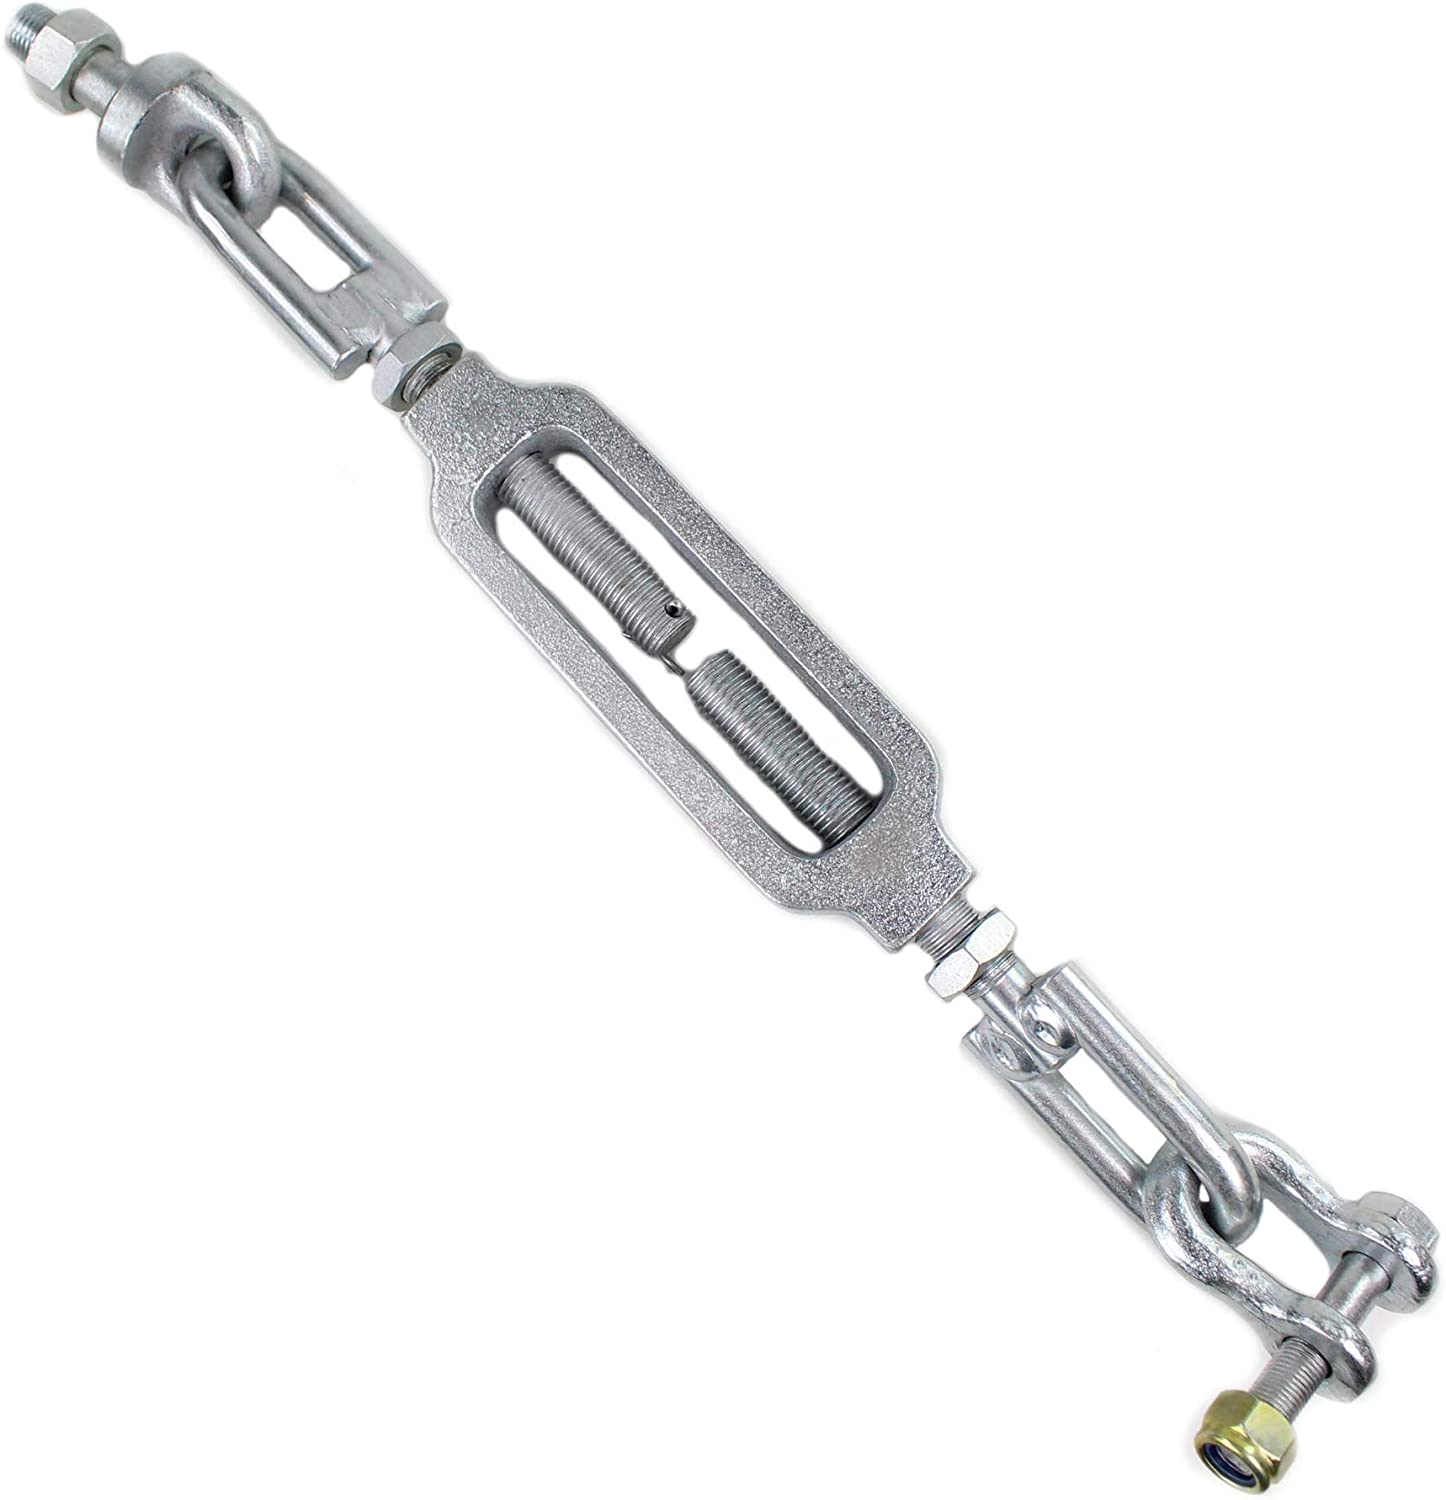 TC822-39680  Check Chain Assembly Fits For Kubota